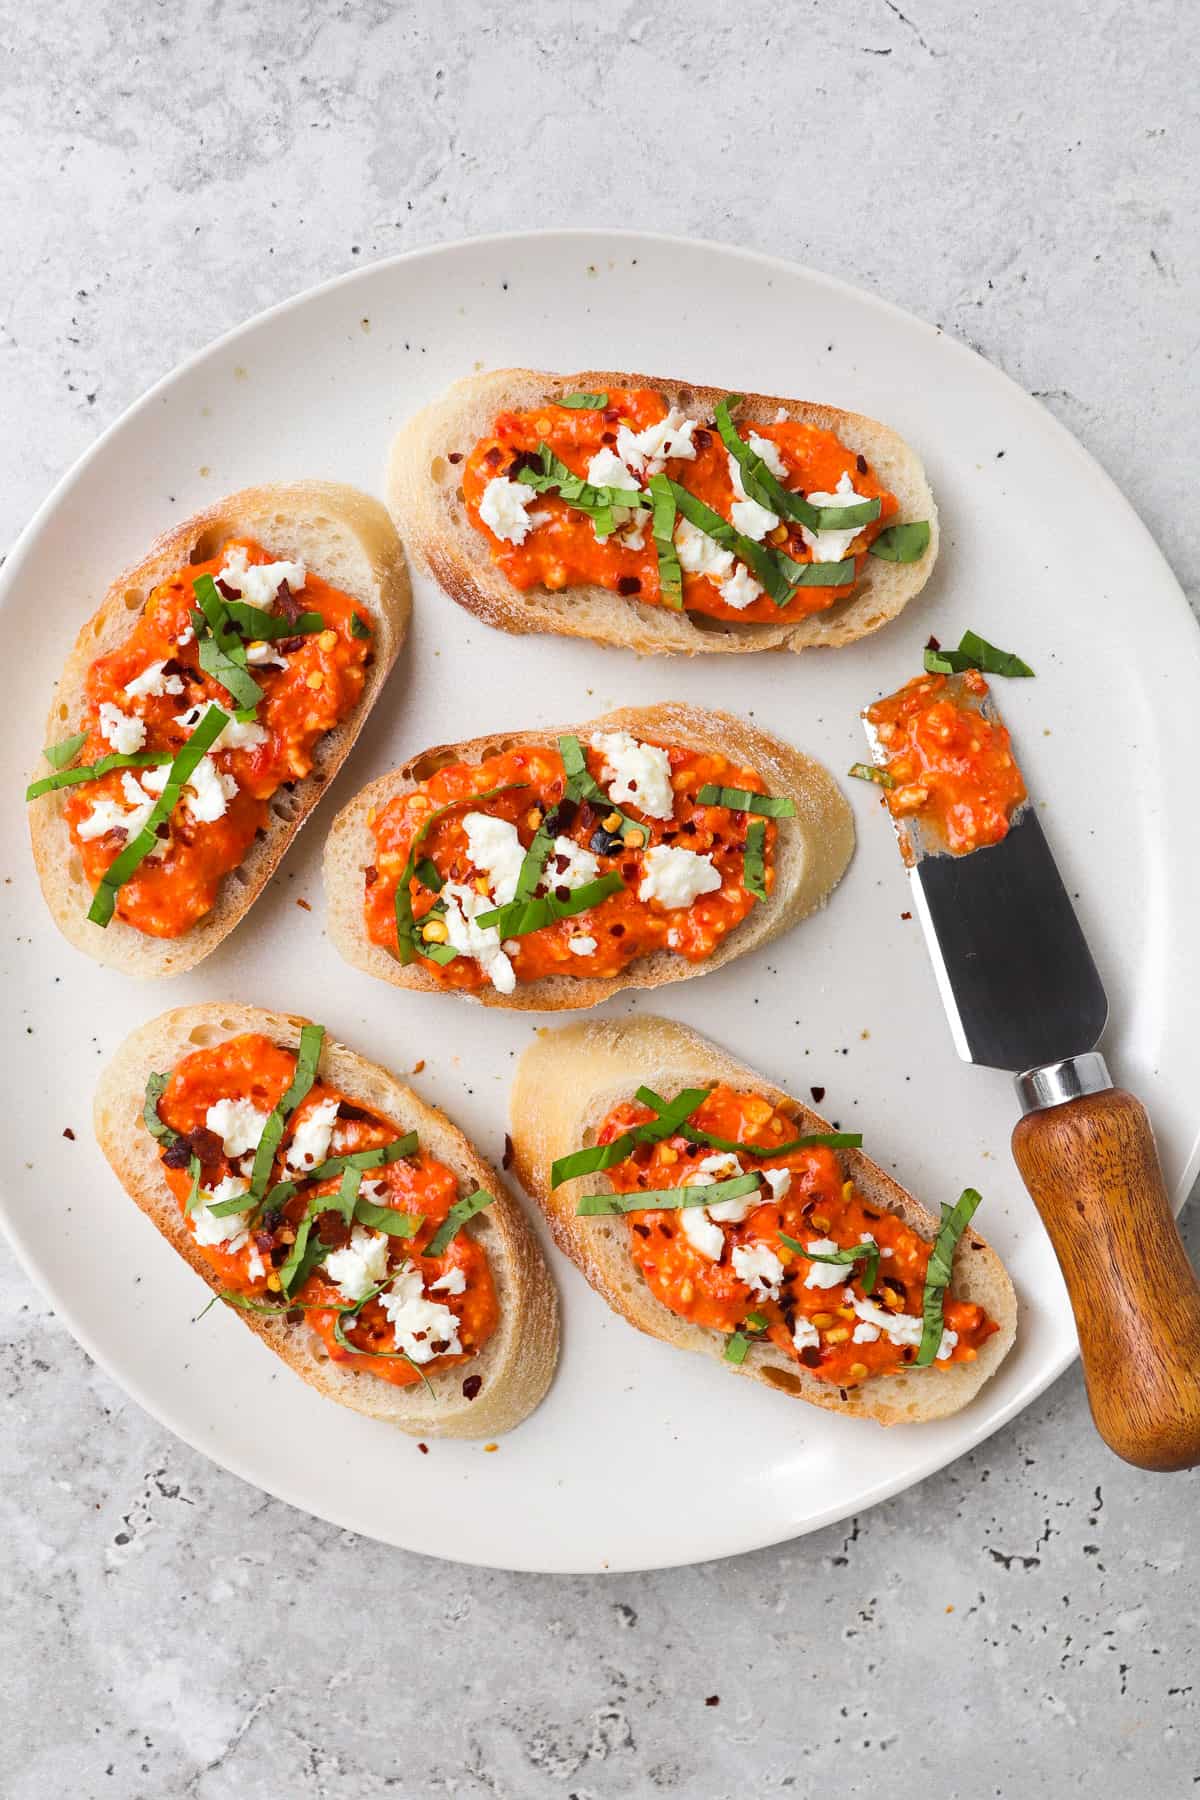 Crostini with dip topped with feta, basil and chili flakes.